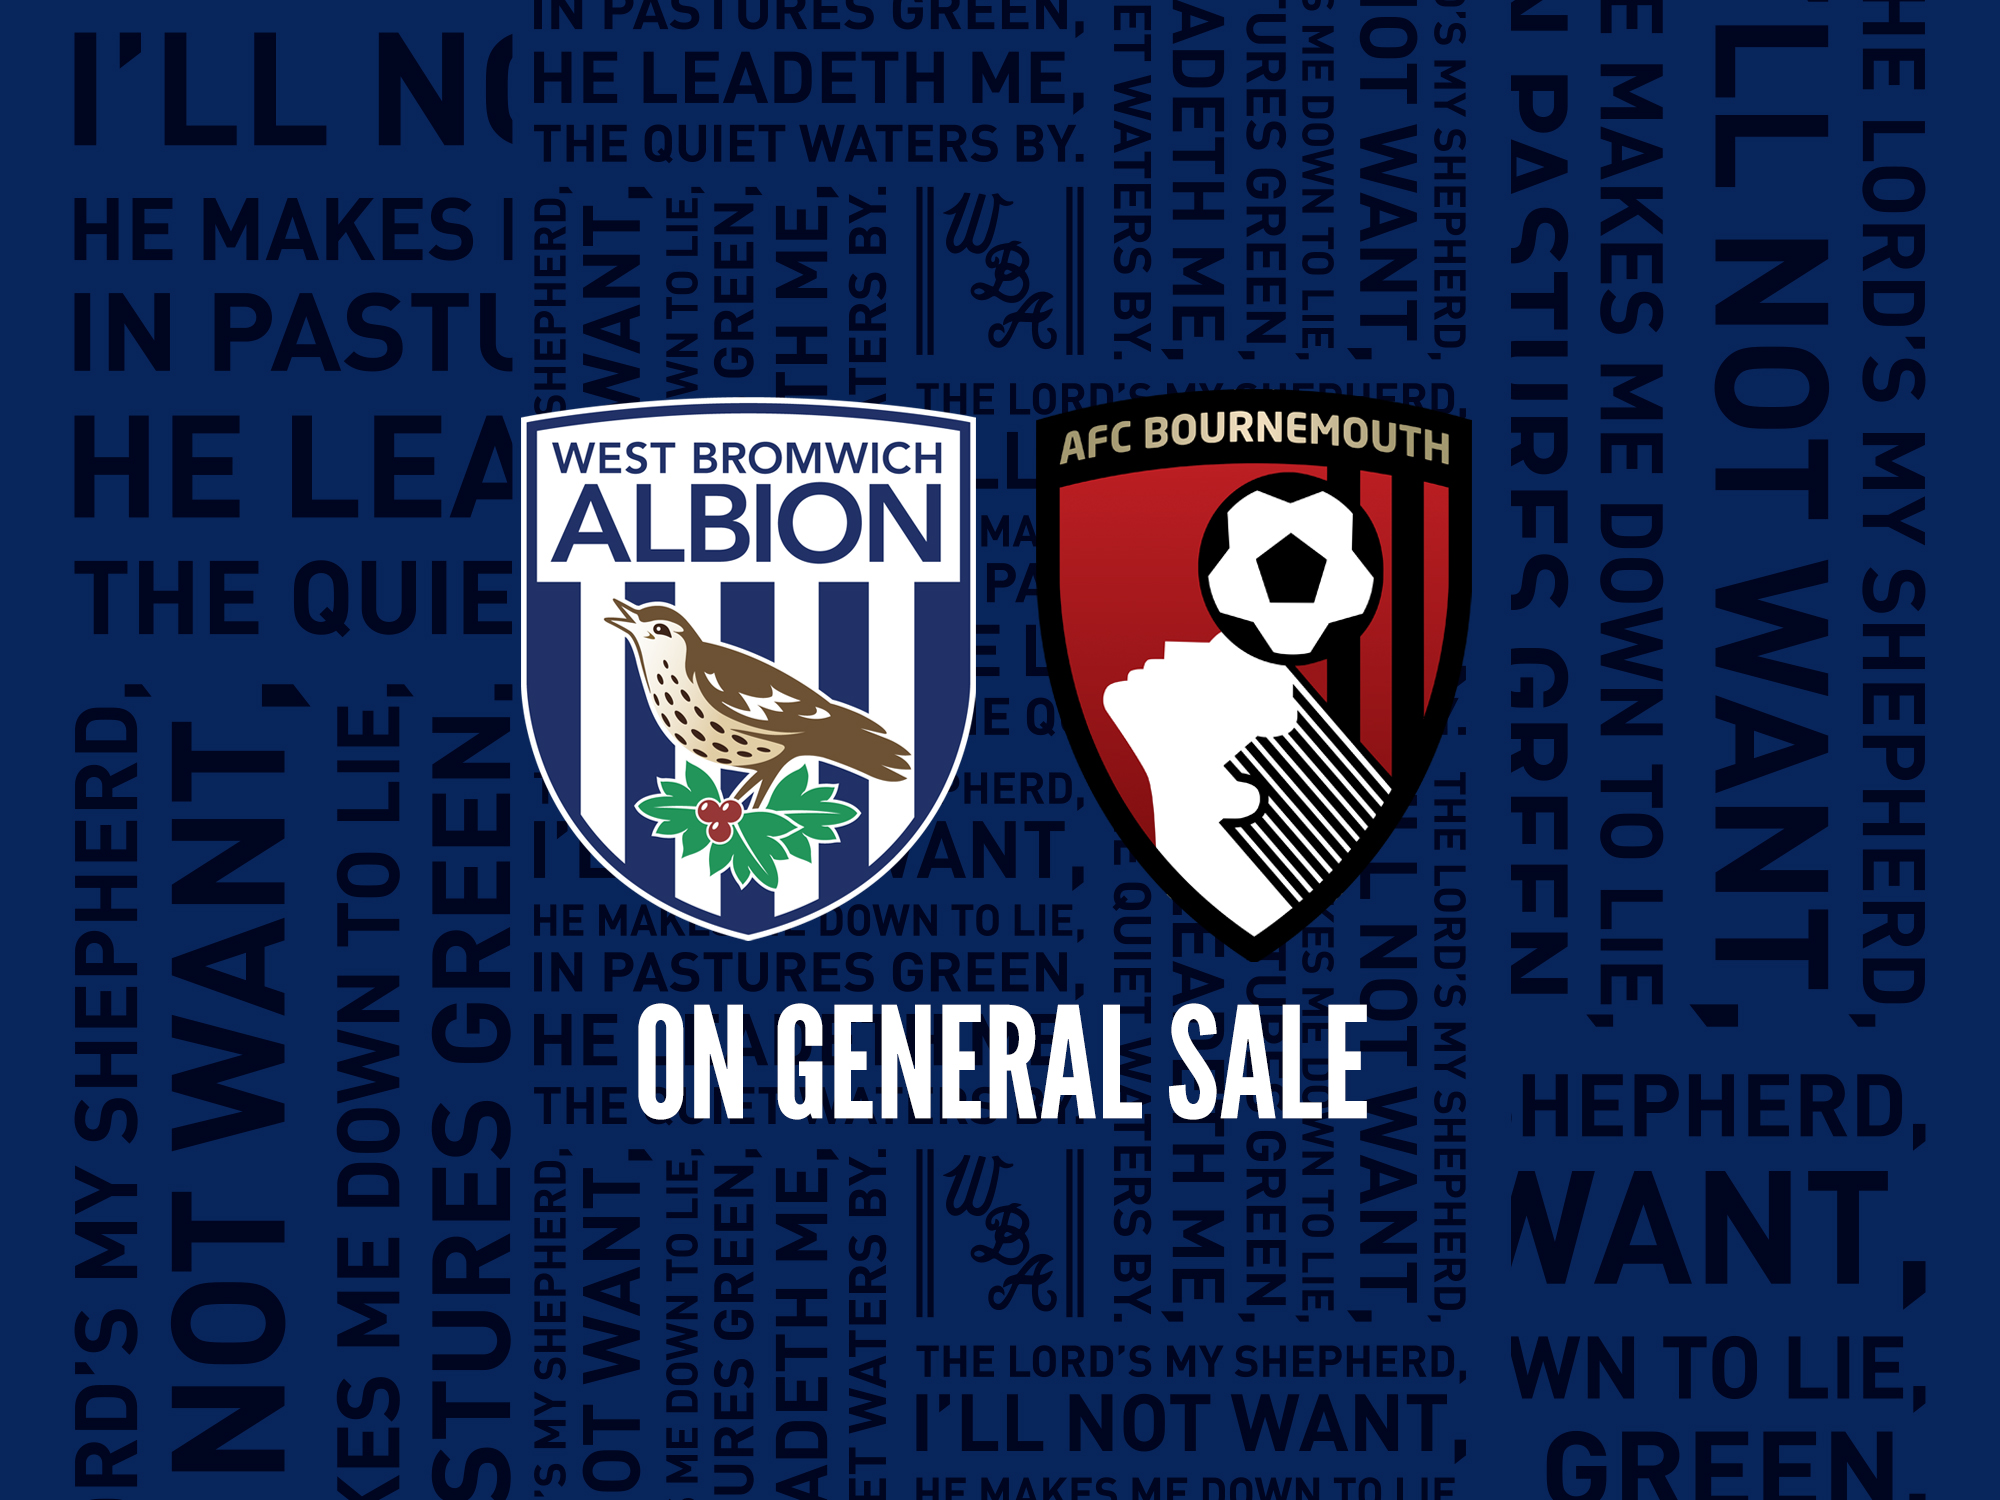 Bournemouth tickets are on general sale